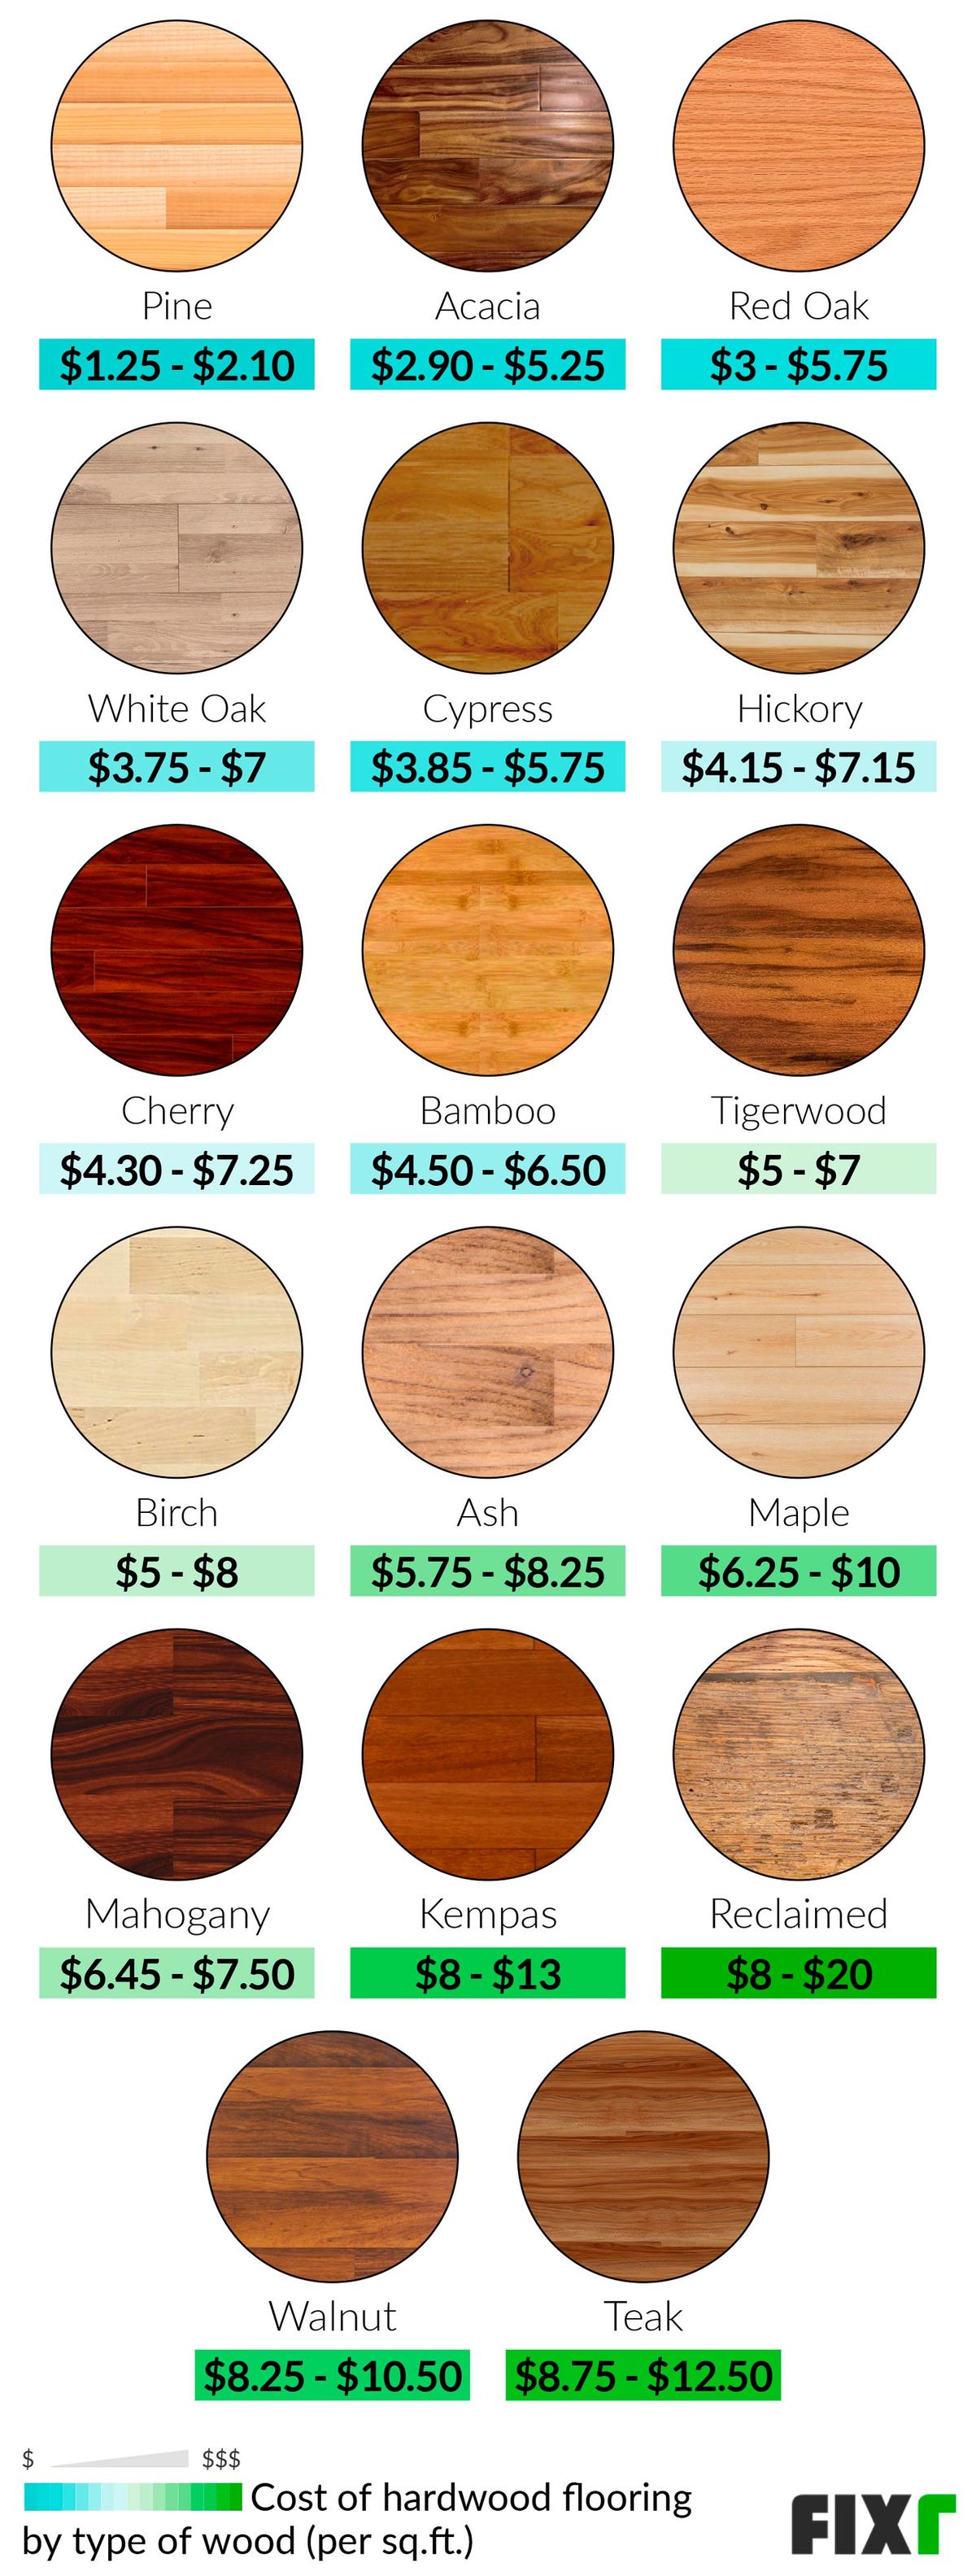 Cost To Install Hardwood Flooring, Cost Per Sq Ft For Hardwood Floors